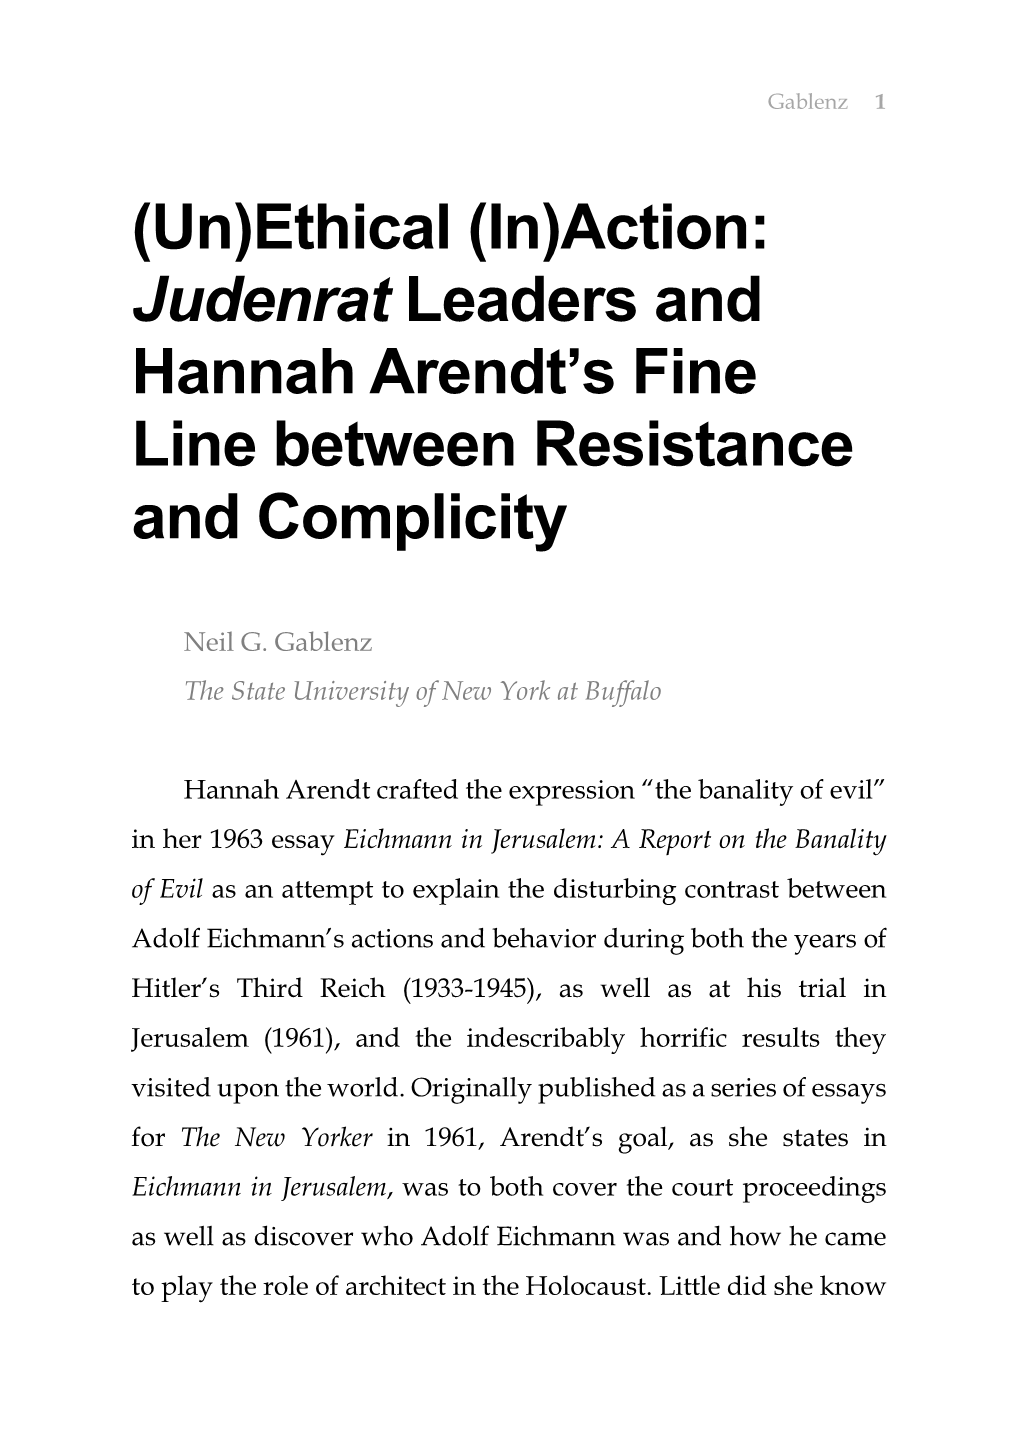 Judenrat Leaders and Hannah Arendt's Fine Line Between